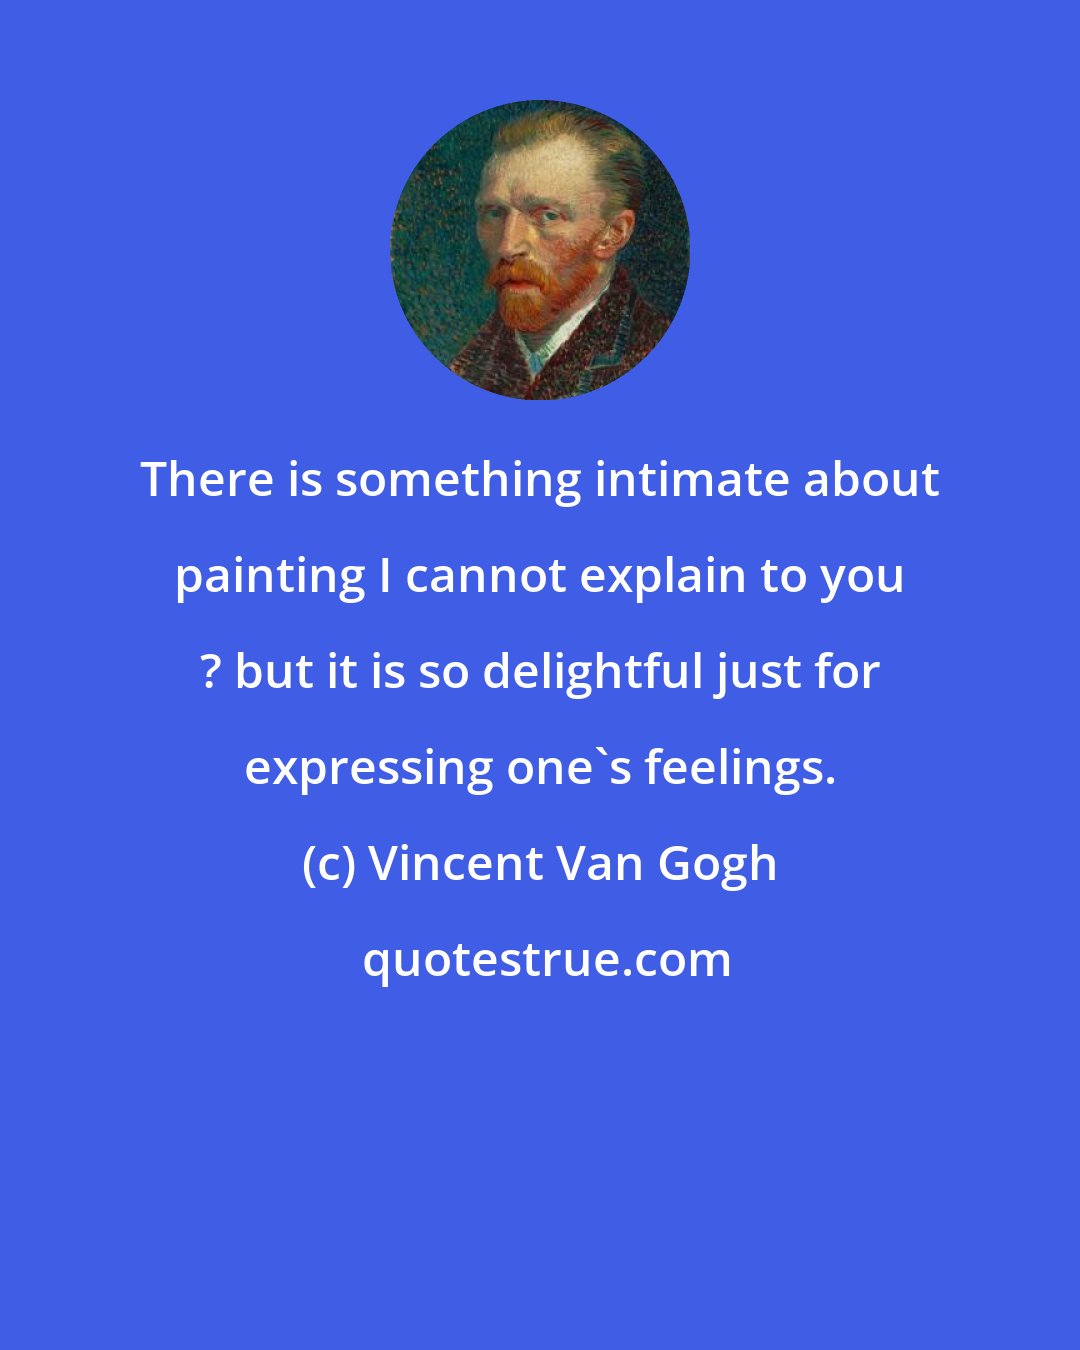 Vincent Van Gogh: There is something intimate about painting I cannot explain to you ? but it is so delightful just for expressing one's feelings.